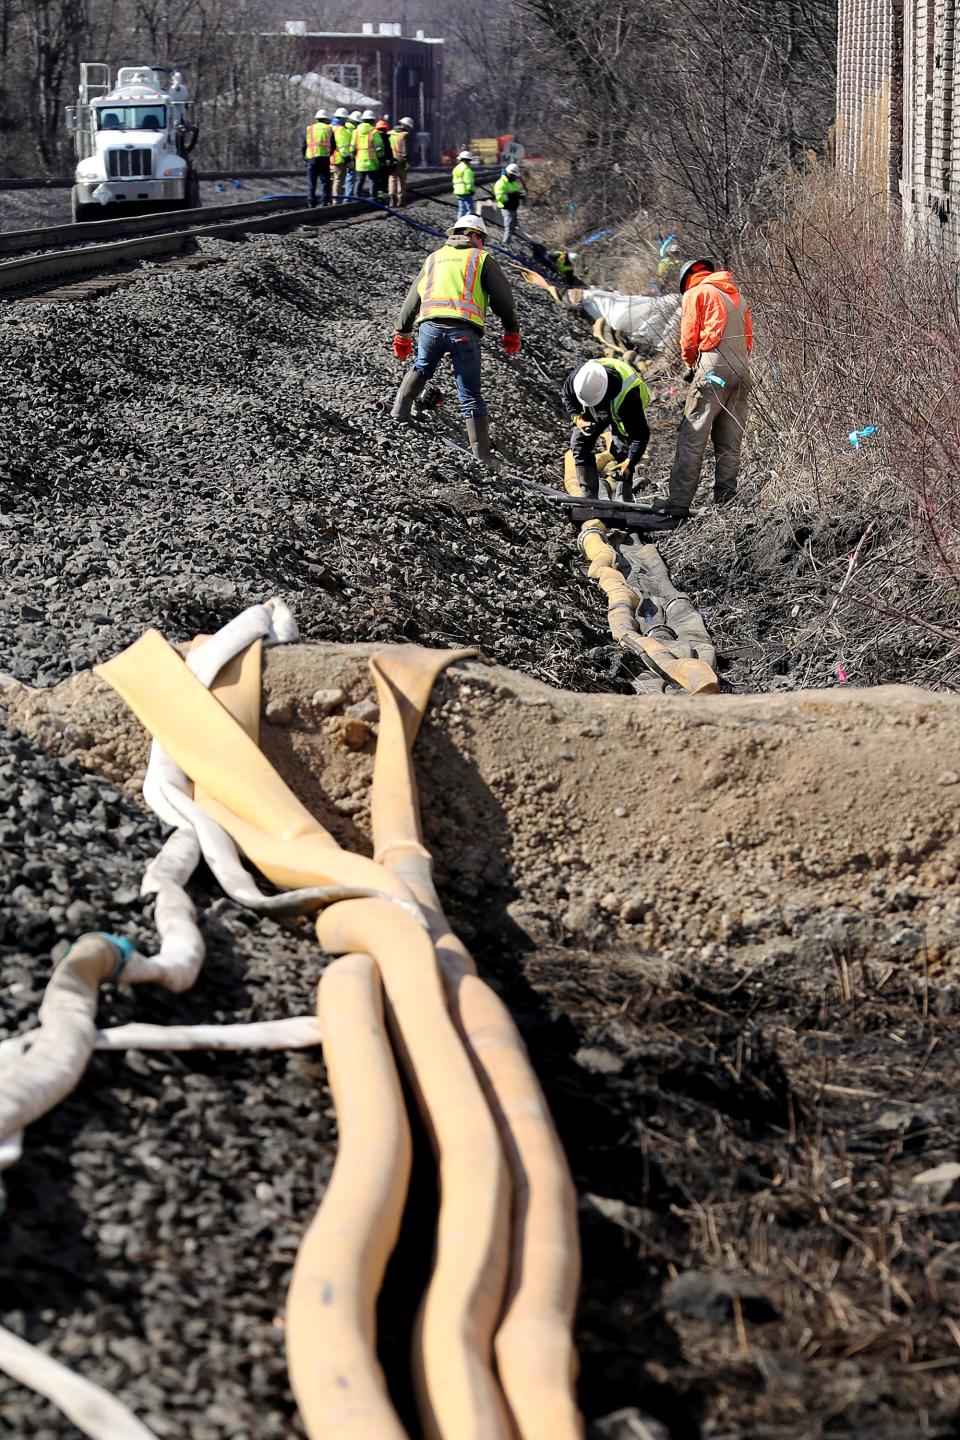 Crews clean out and take samples of soil and water from the ditches near the site of the Norfolk Southern train derailment, Tuesday, Feb. 21, 2023, in East Palestine, Ohio.